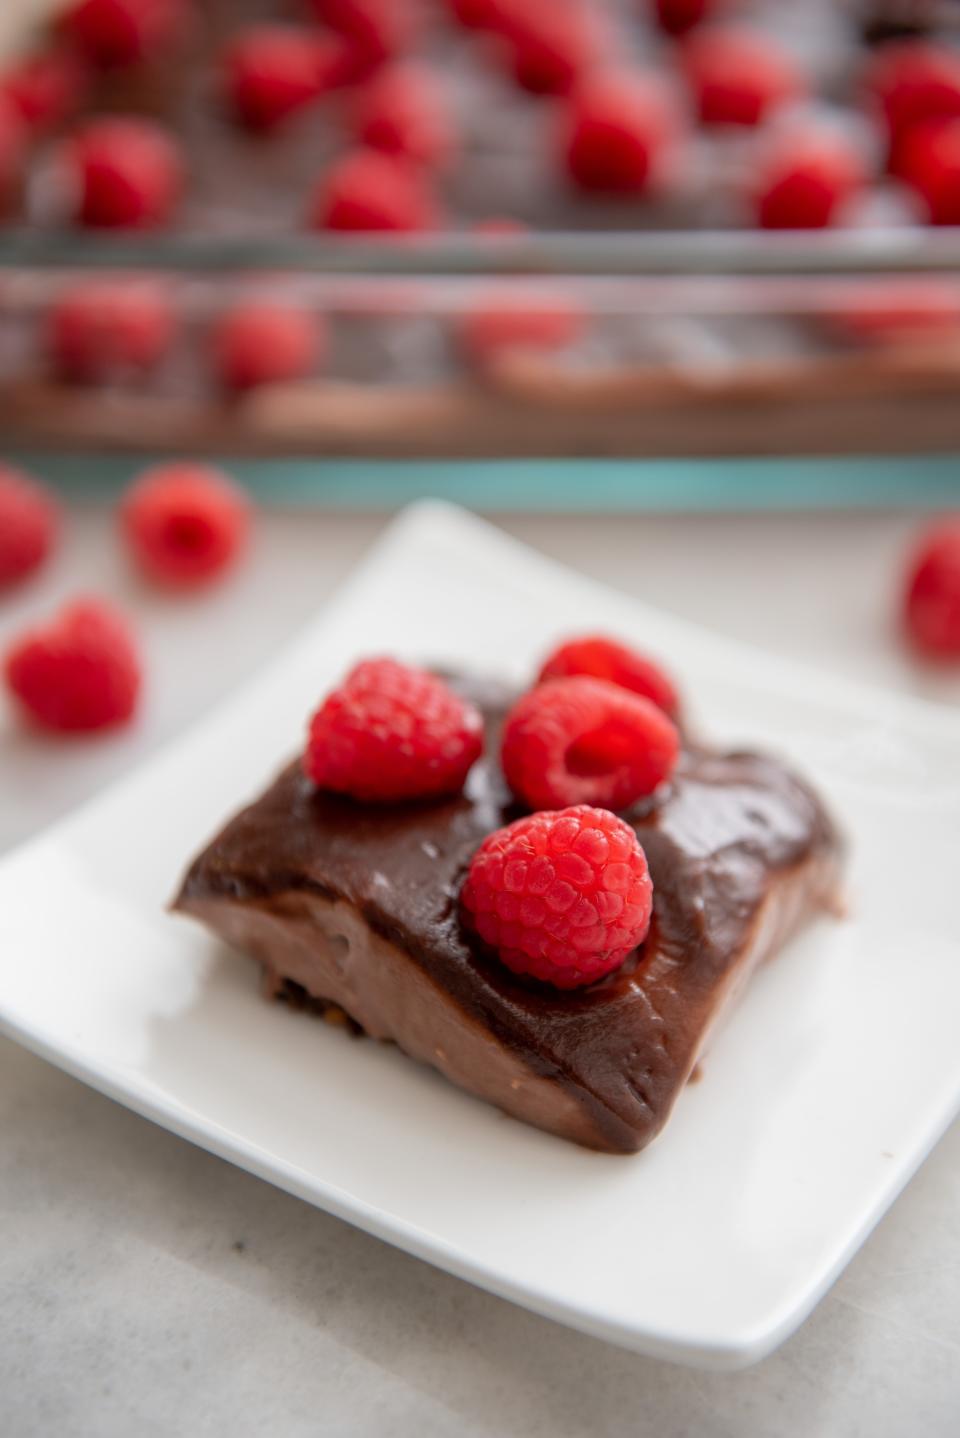 Chocolate pie topped with raspberries is low in fat and calories.